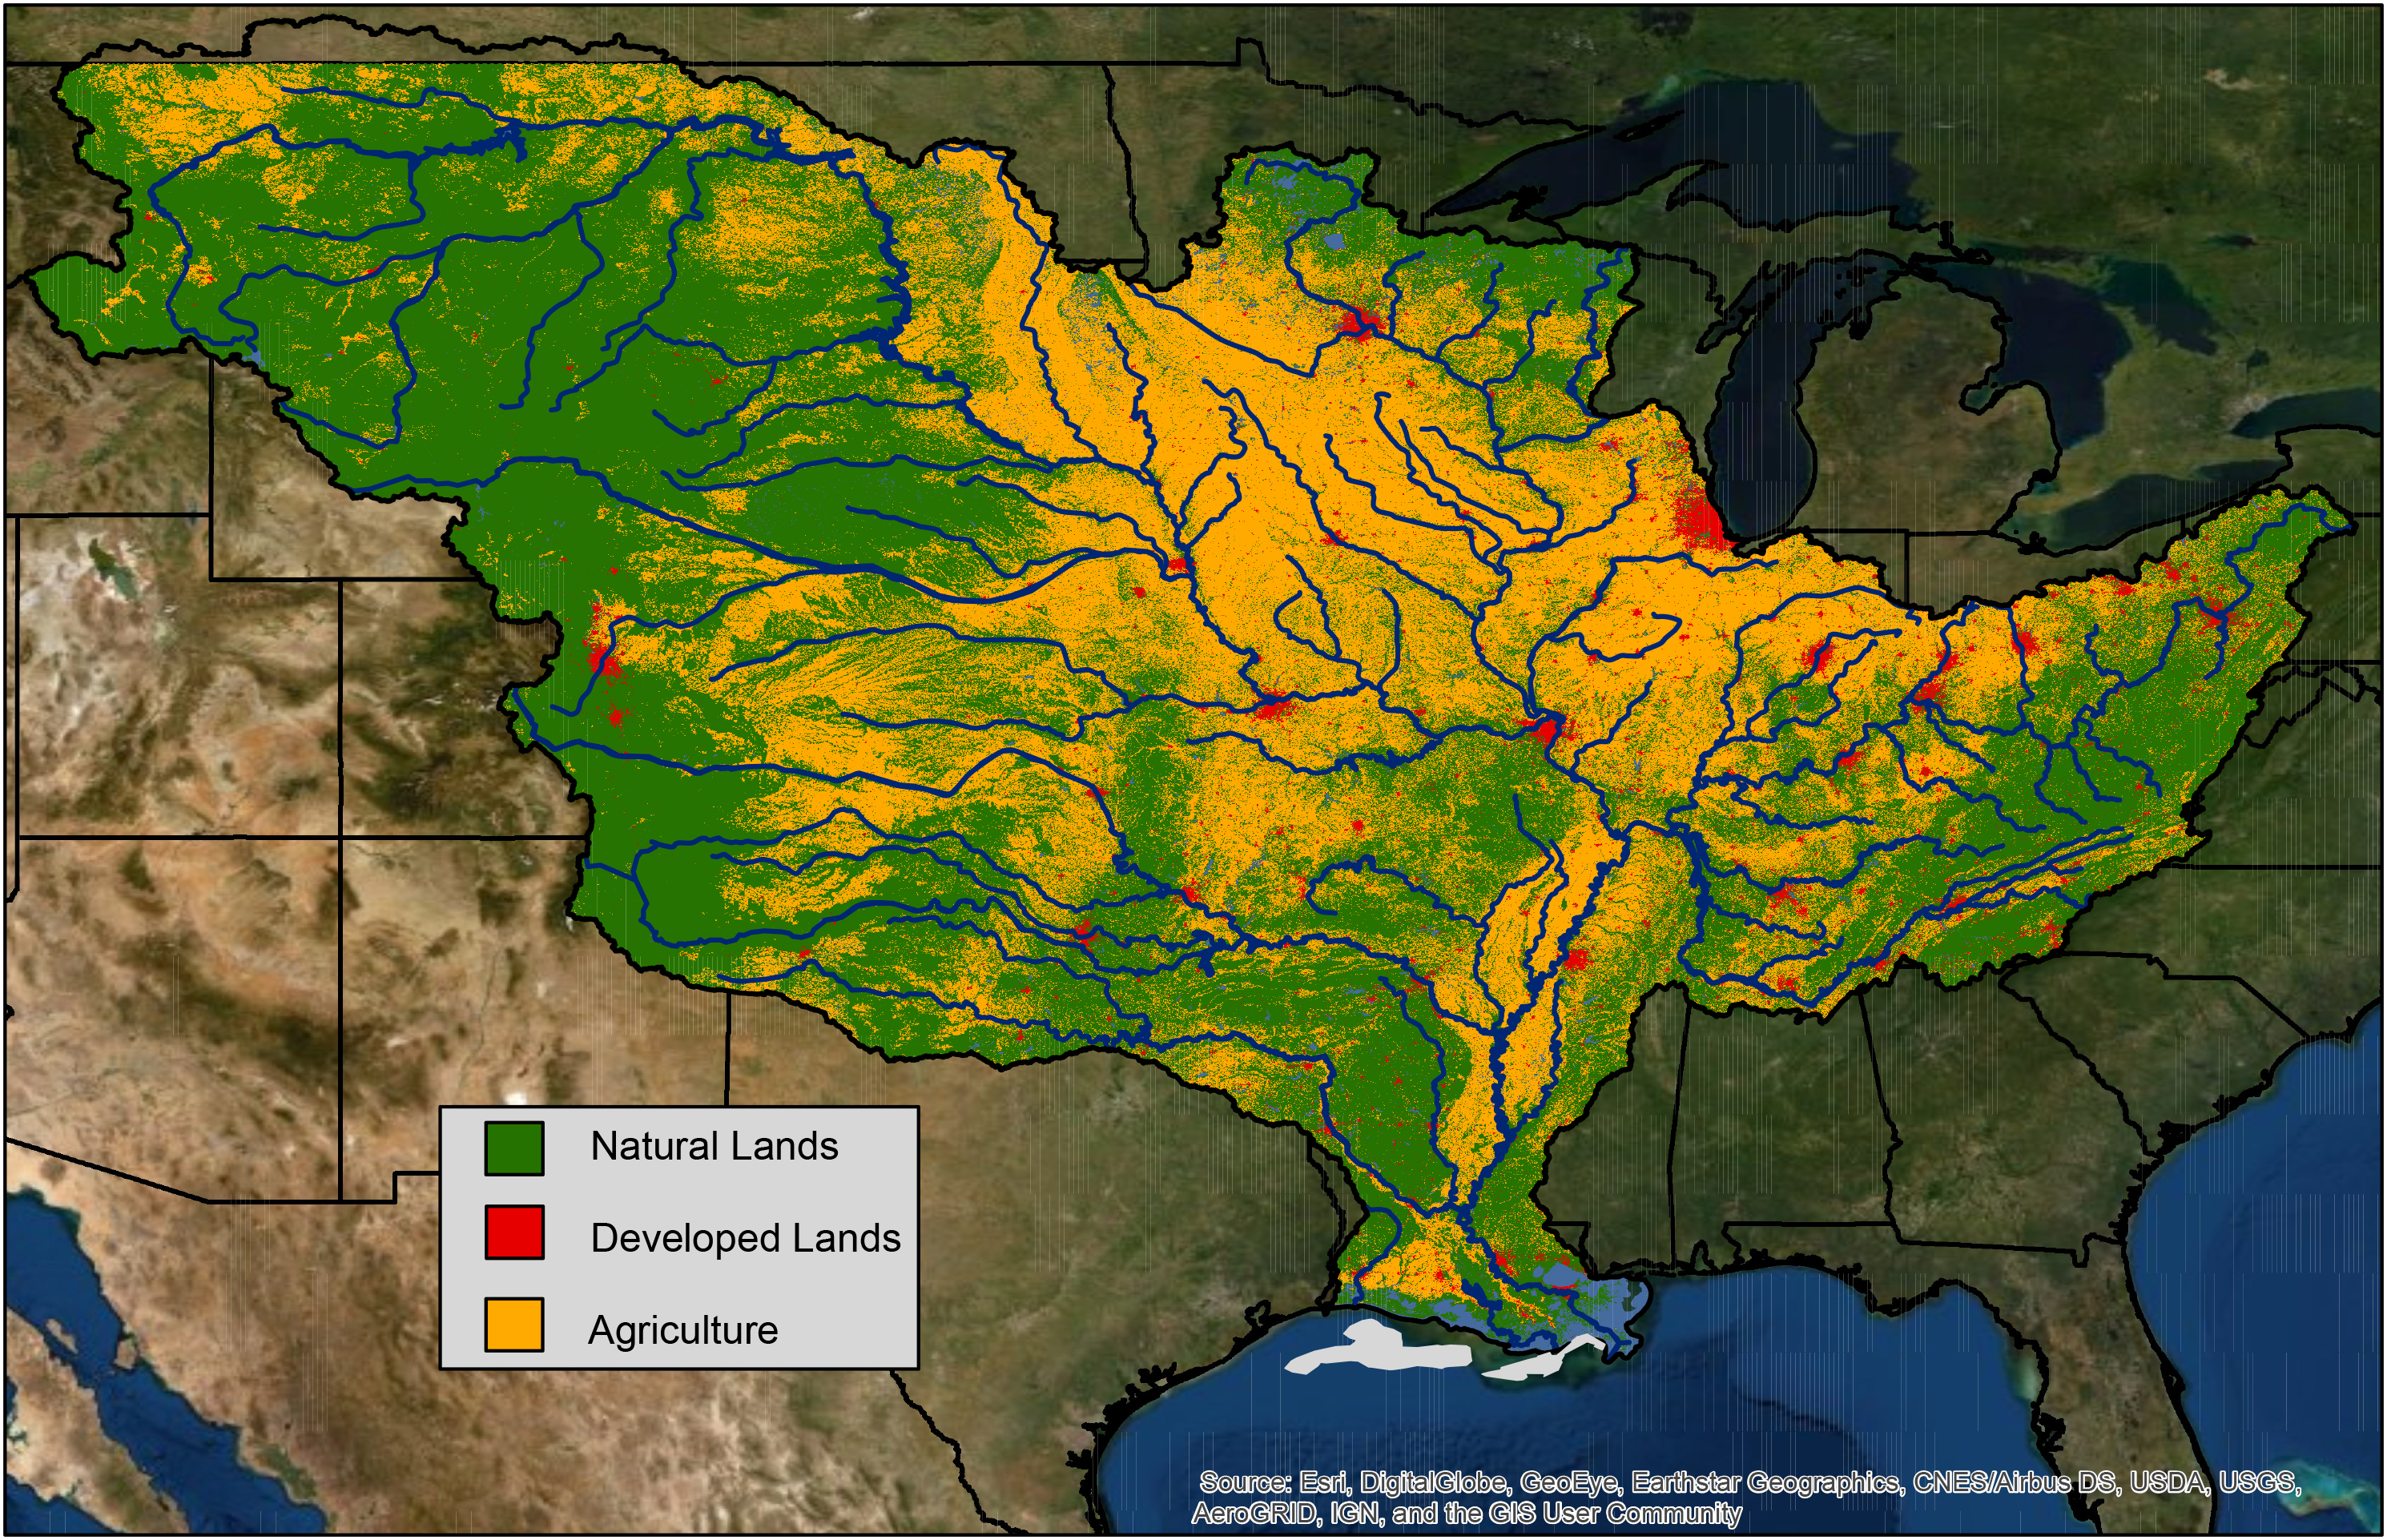 The Mississippi River watershed, which encompasses over 40% of the continental U.S and crosses 22 state boundaries, is made up of farms (yellow), cities (red), and natural lands (green). Nitrogen and phosphorus pollution in runoff and discharges from agricultural and urban areas are the major contributors to the annual summer hypoxic dead zone in the Gulf of Mexico (gray).